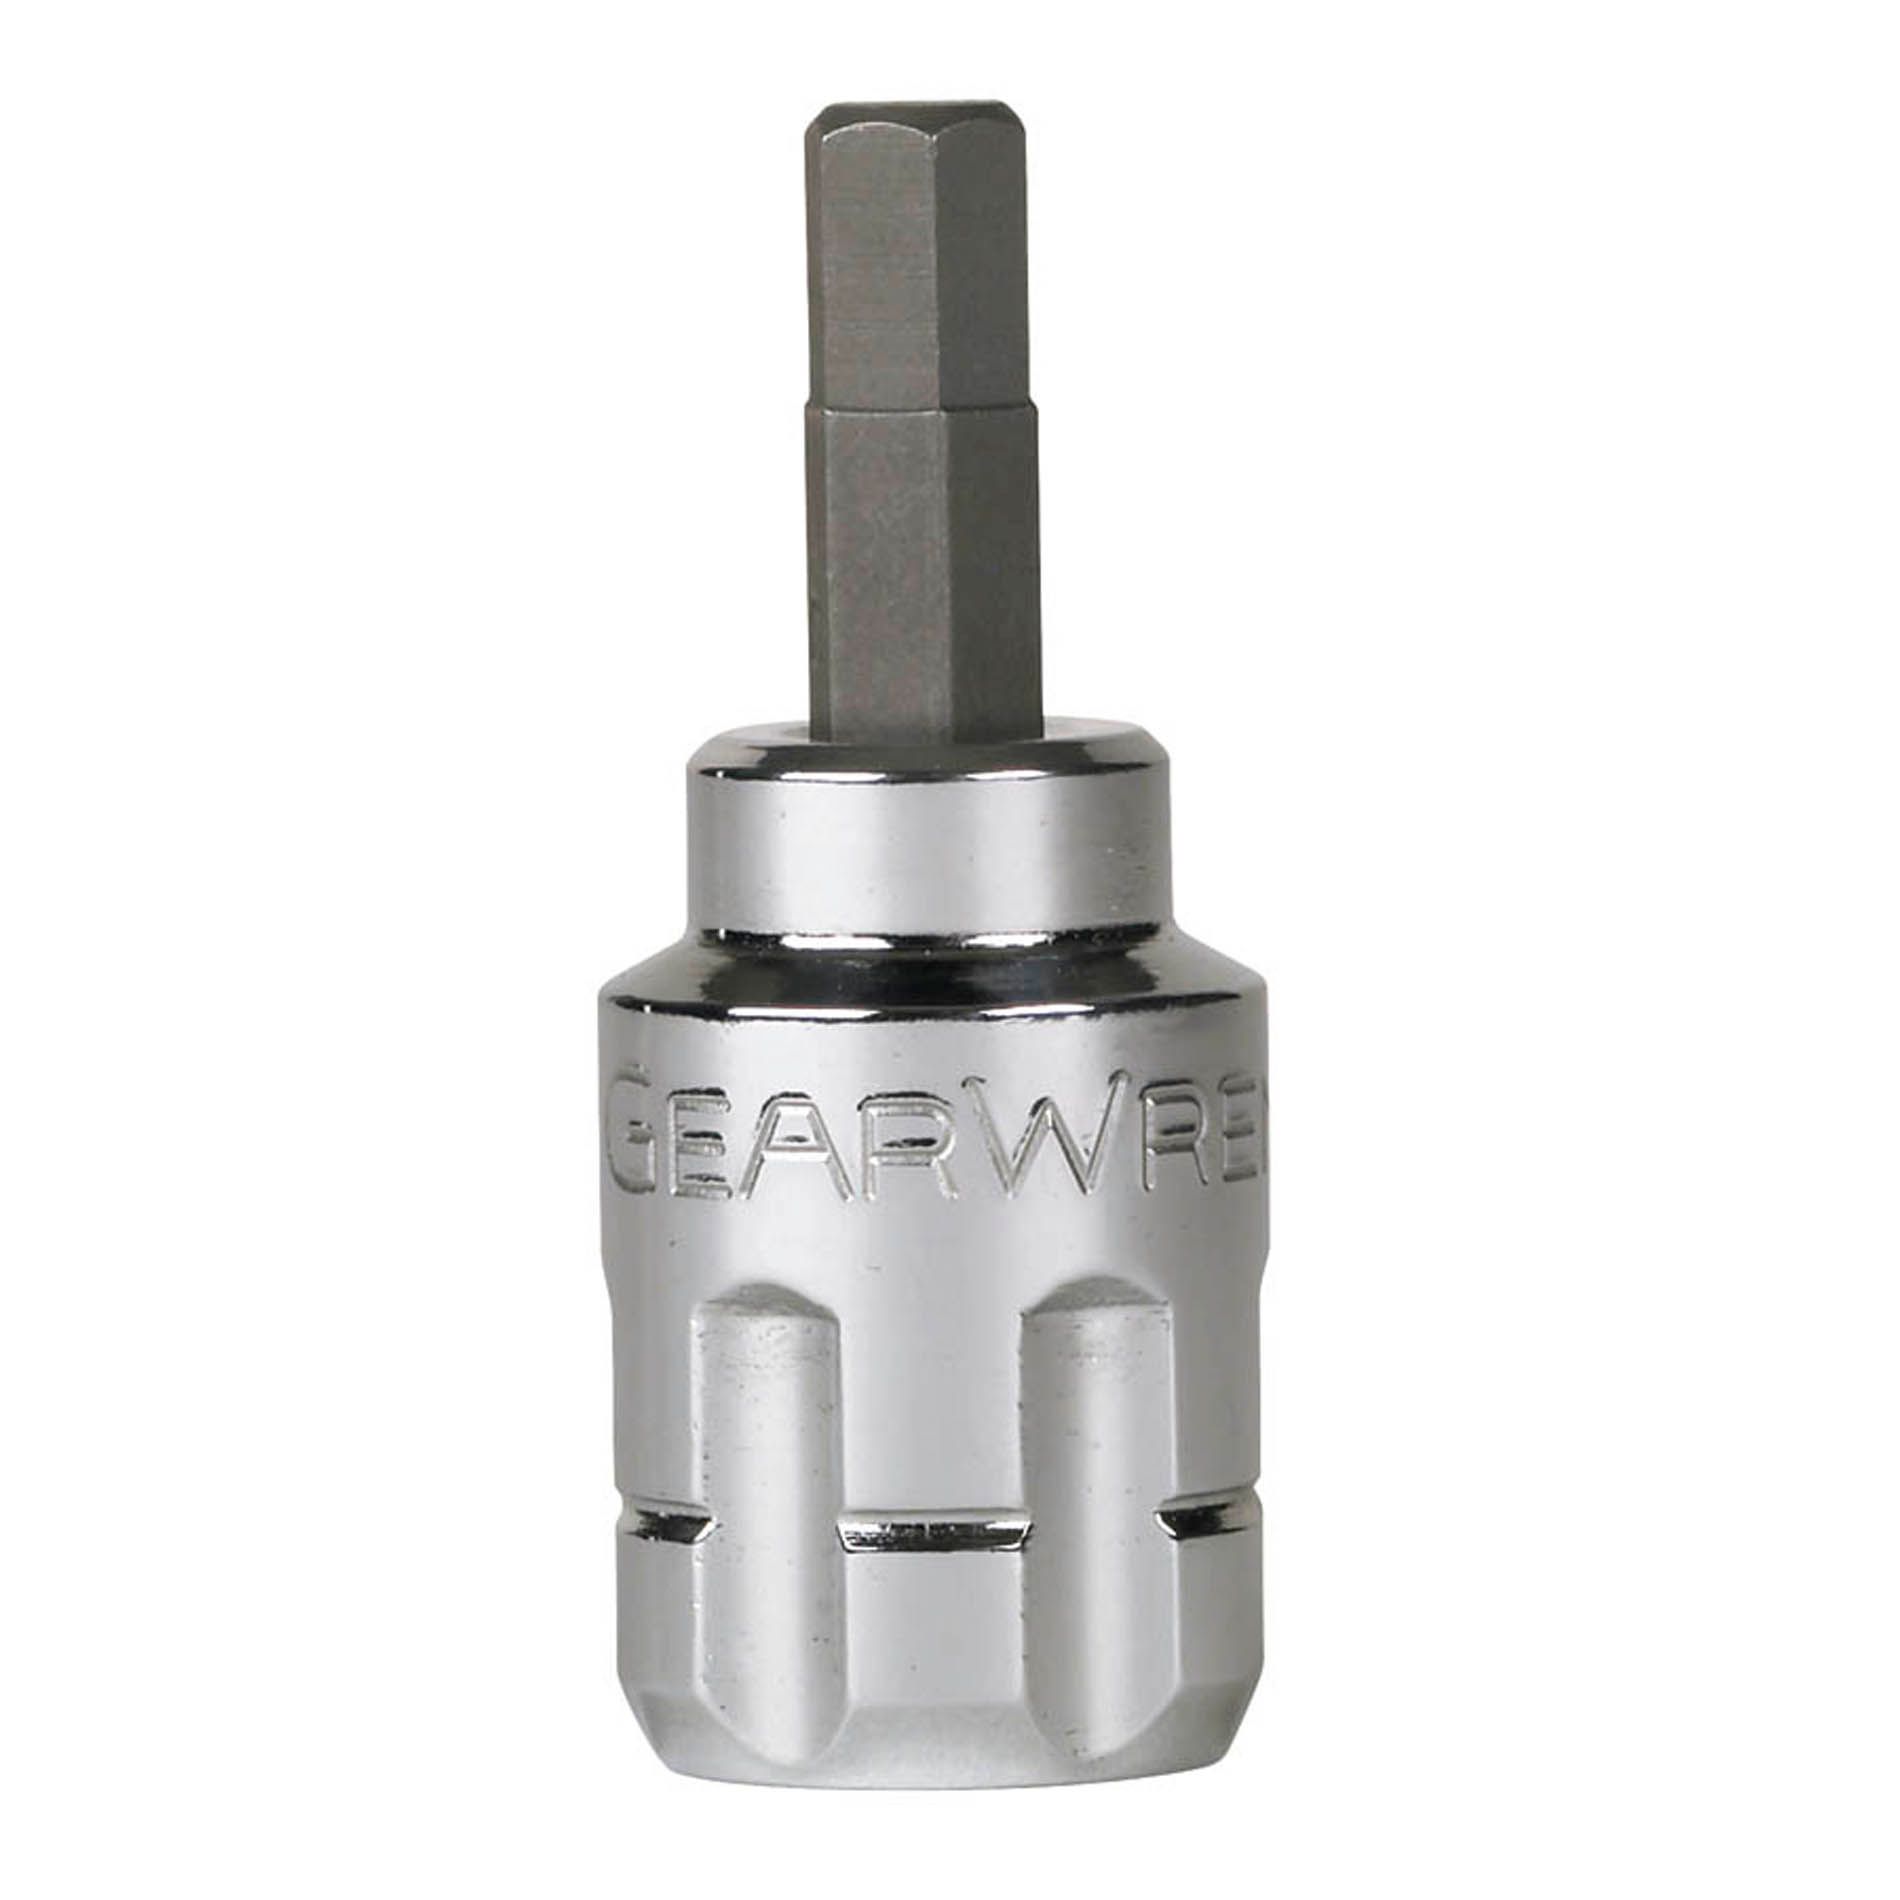 GearWrench 1/4 Inch Drive  Pass Thru Ratchet Square Drive Bit Socket Hex 3mm